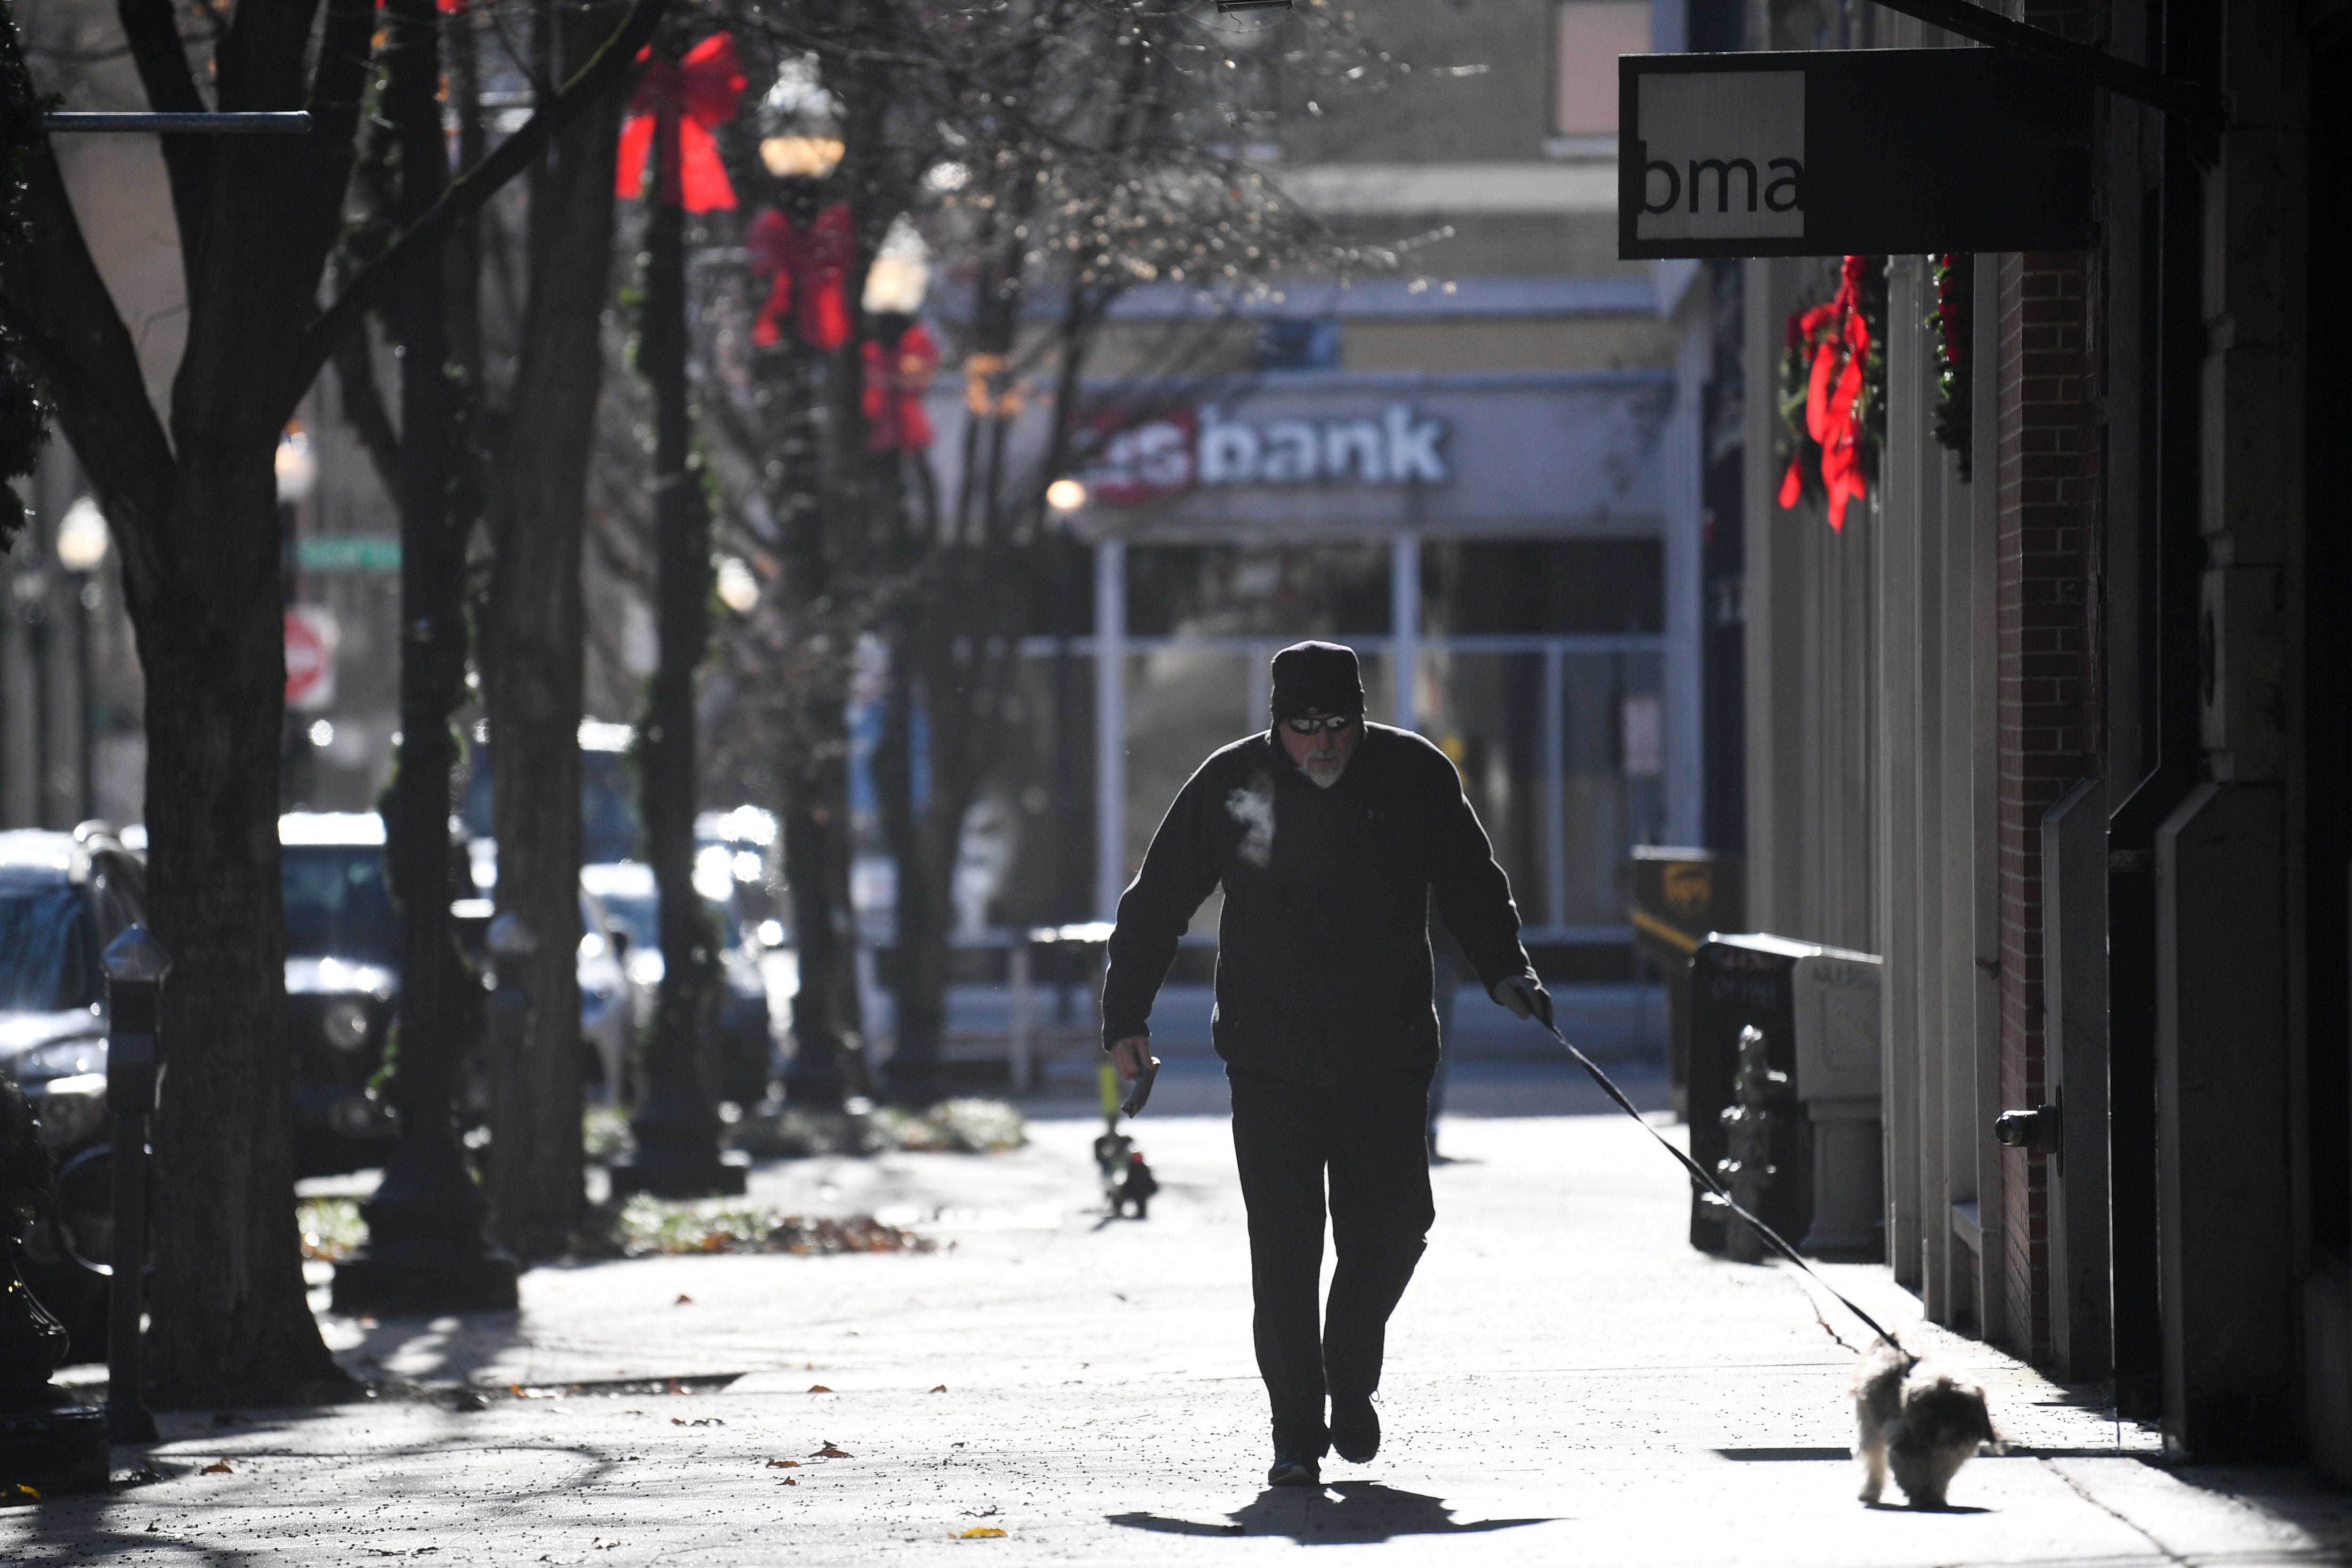 A man walks his dog near Market Square in downtown Knoxville, on Dec. 23. The temperature hovered around 7 degrees early that day after a winter storm moved into the region.